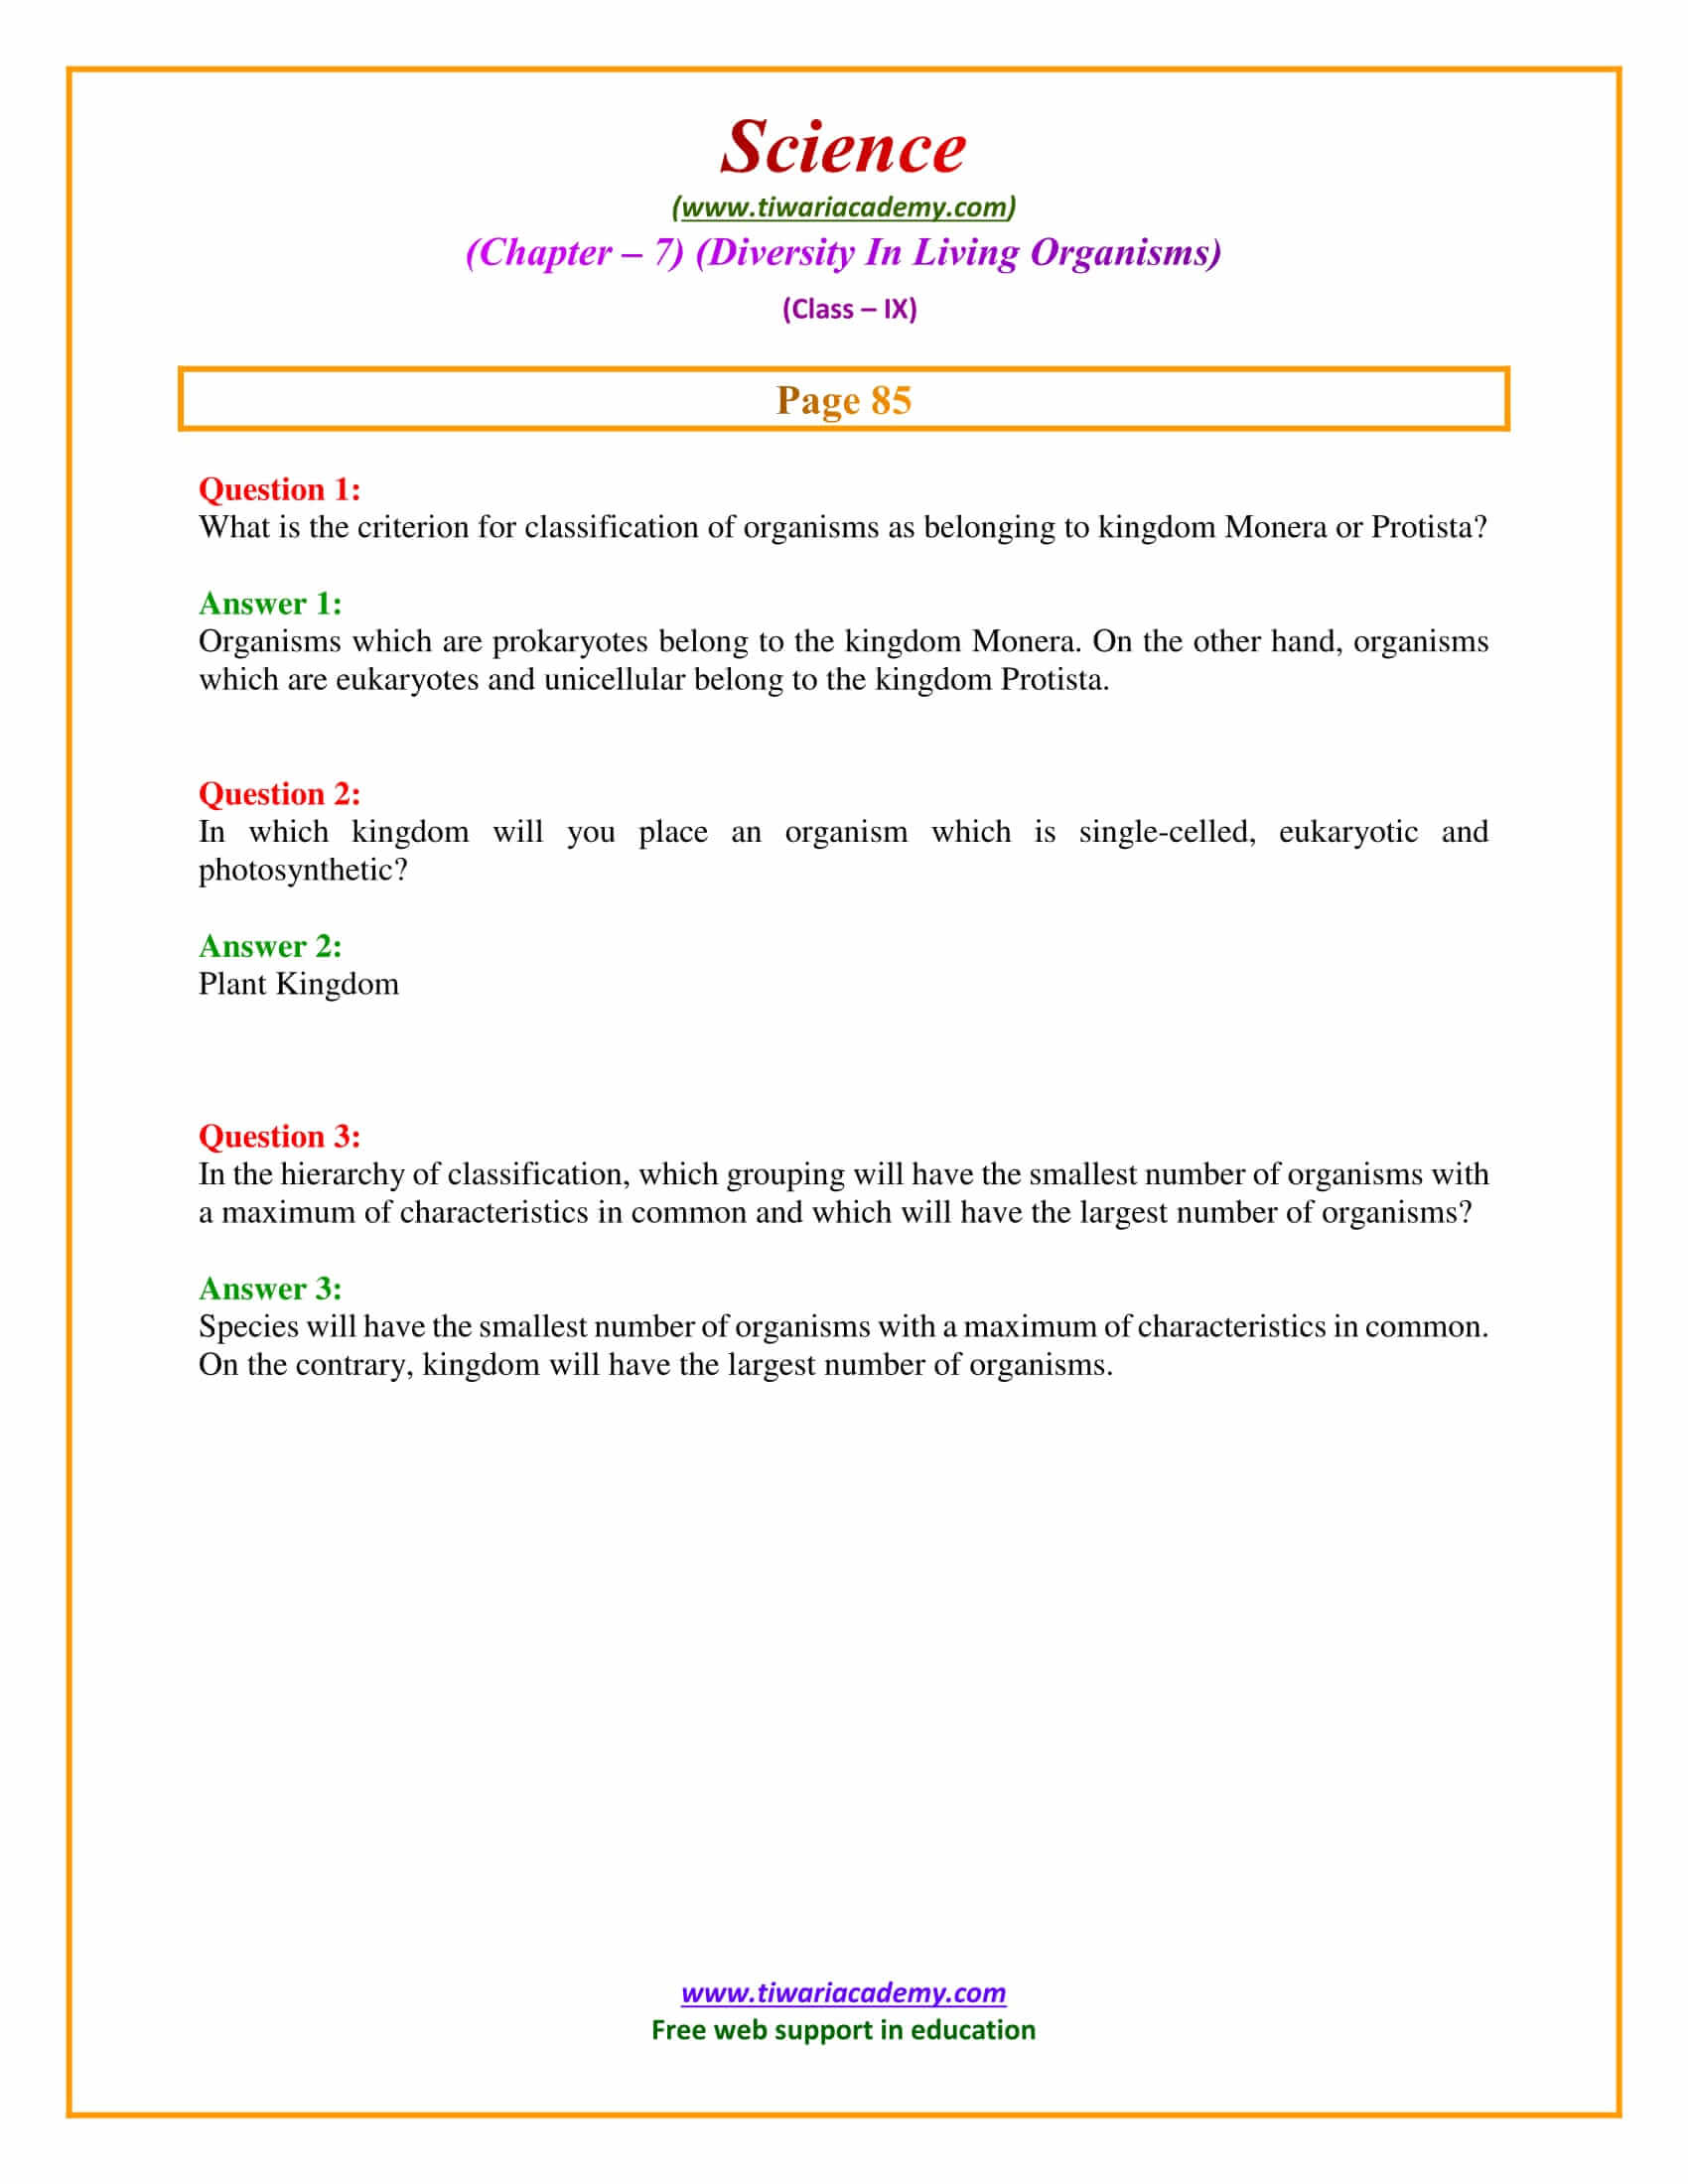 NCERT Solutions for Class 9 Science Chapter 7 Diversity in Living Organisms Intext questions page 85